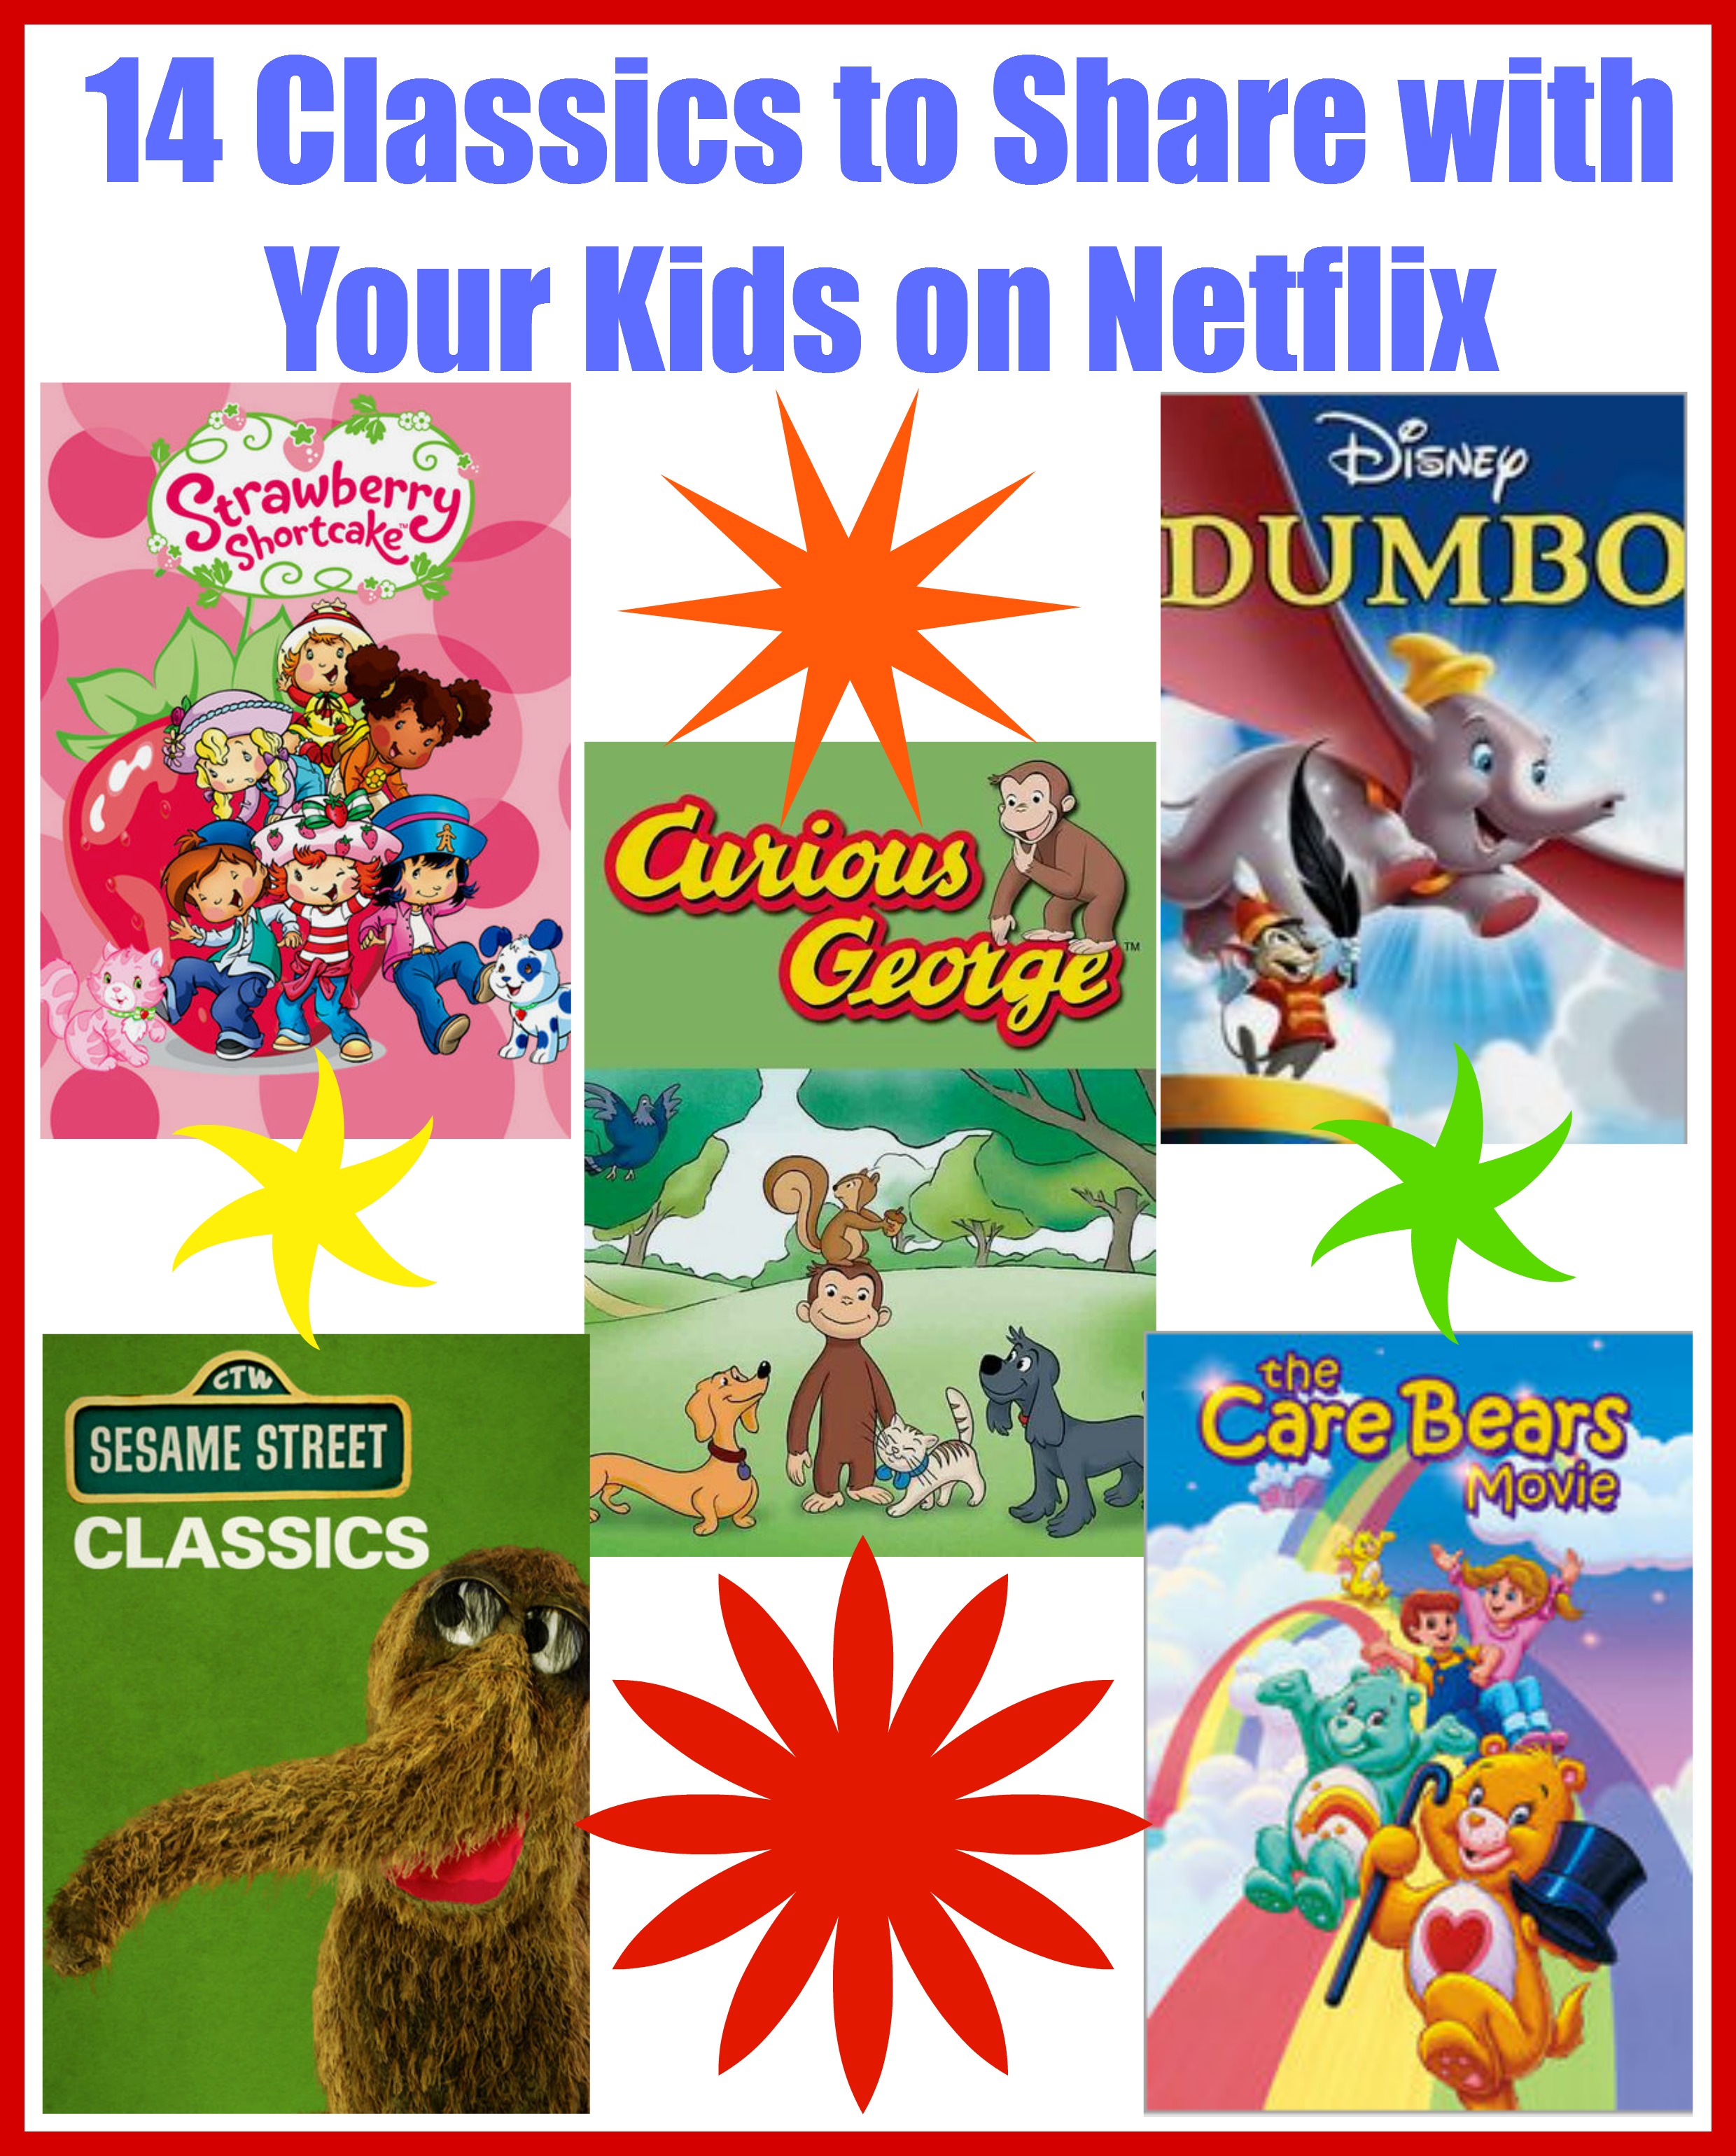 14 Classics to Share with Your Kids on Netflix #StreamTeam